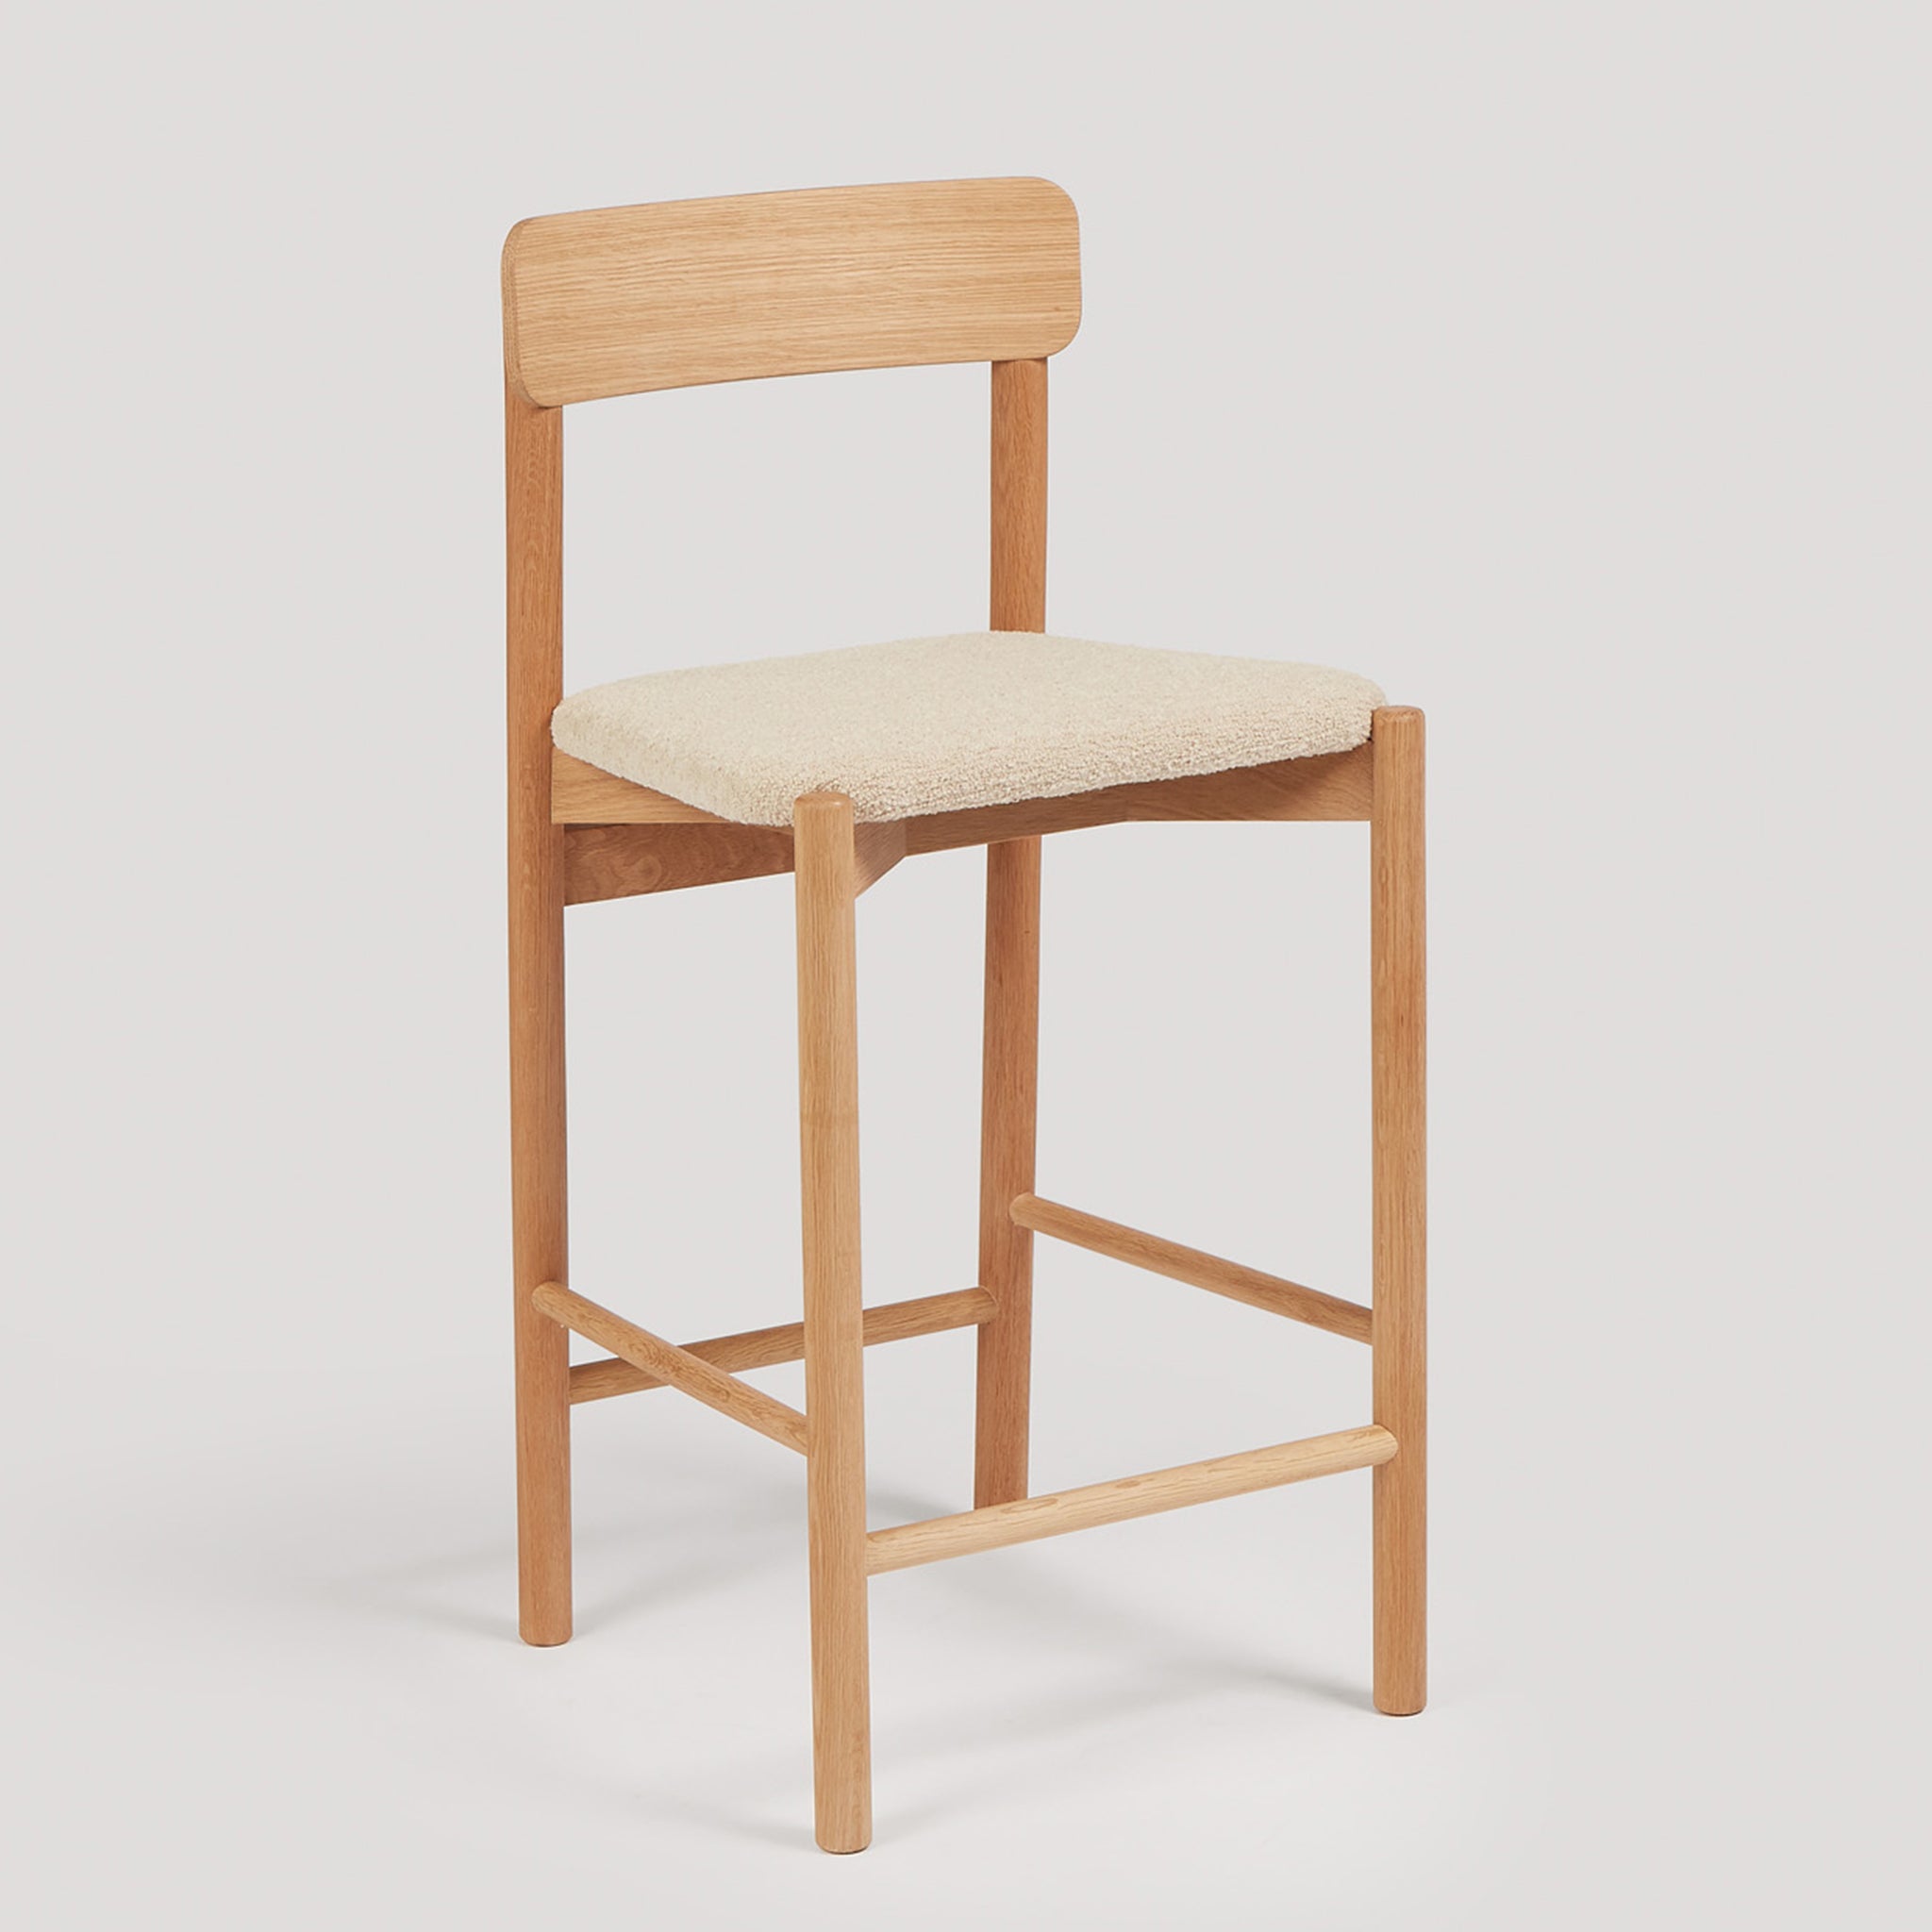 Semley Bar Stool by Another Country